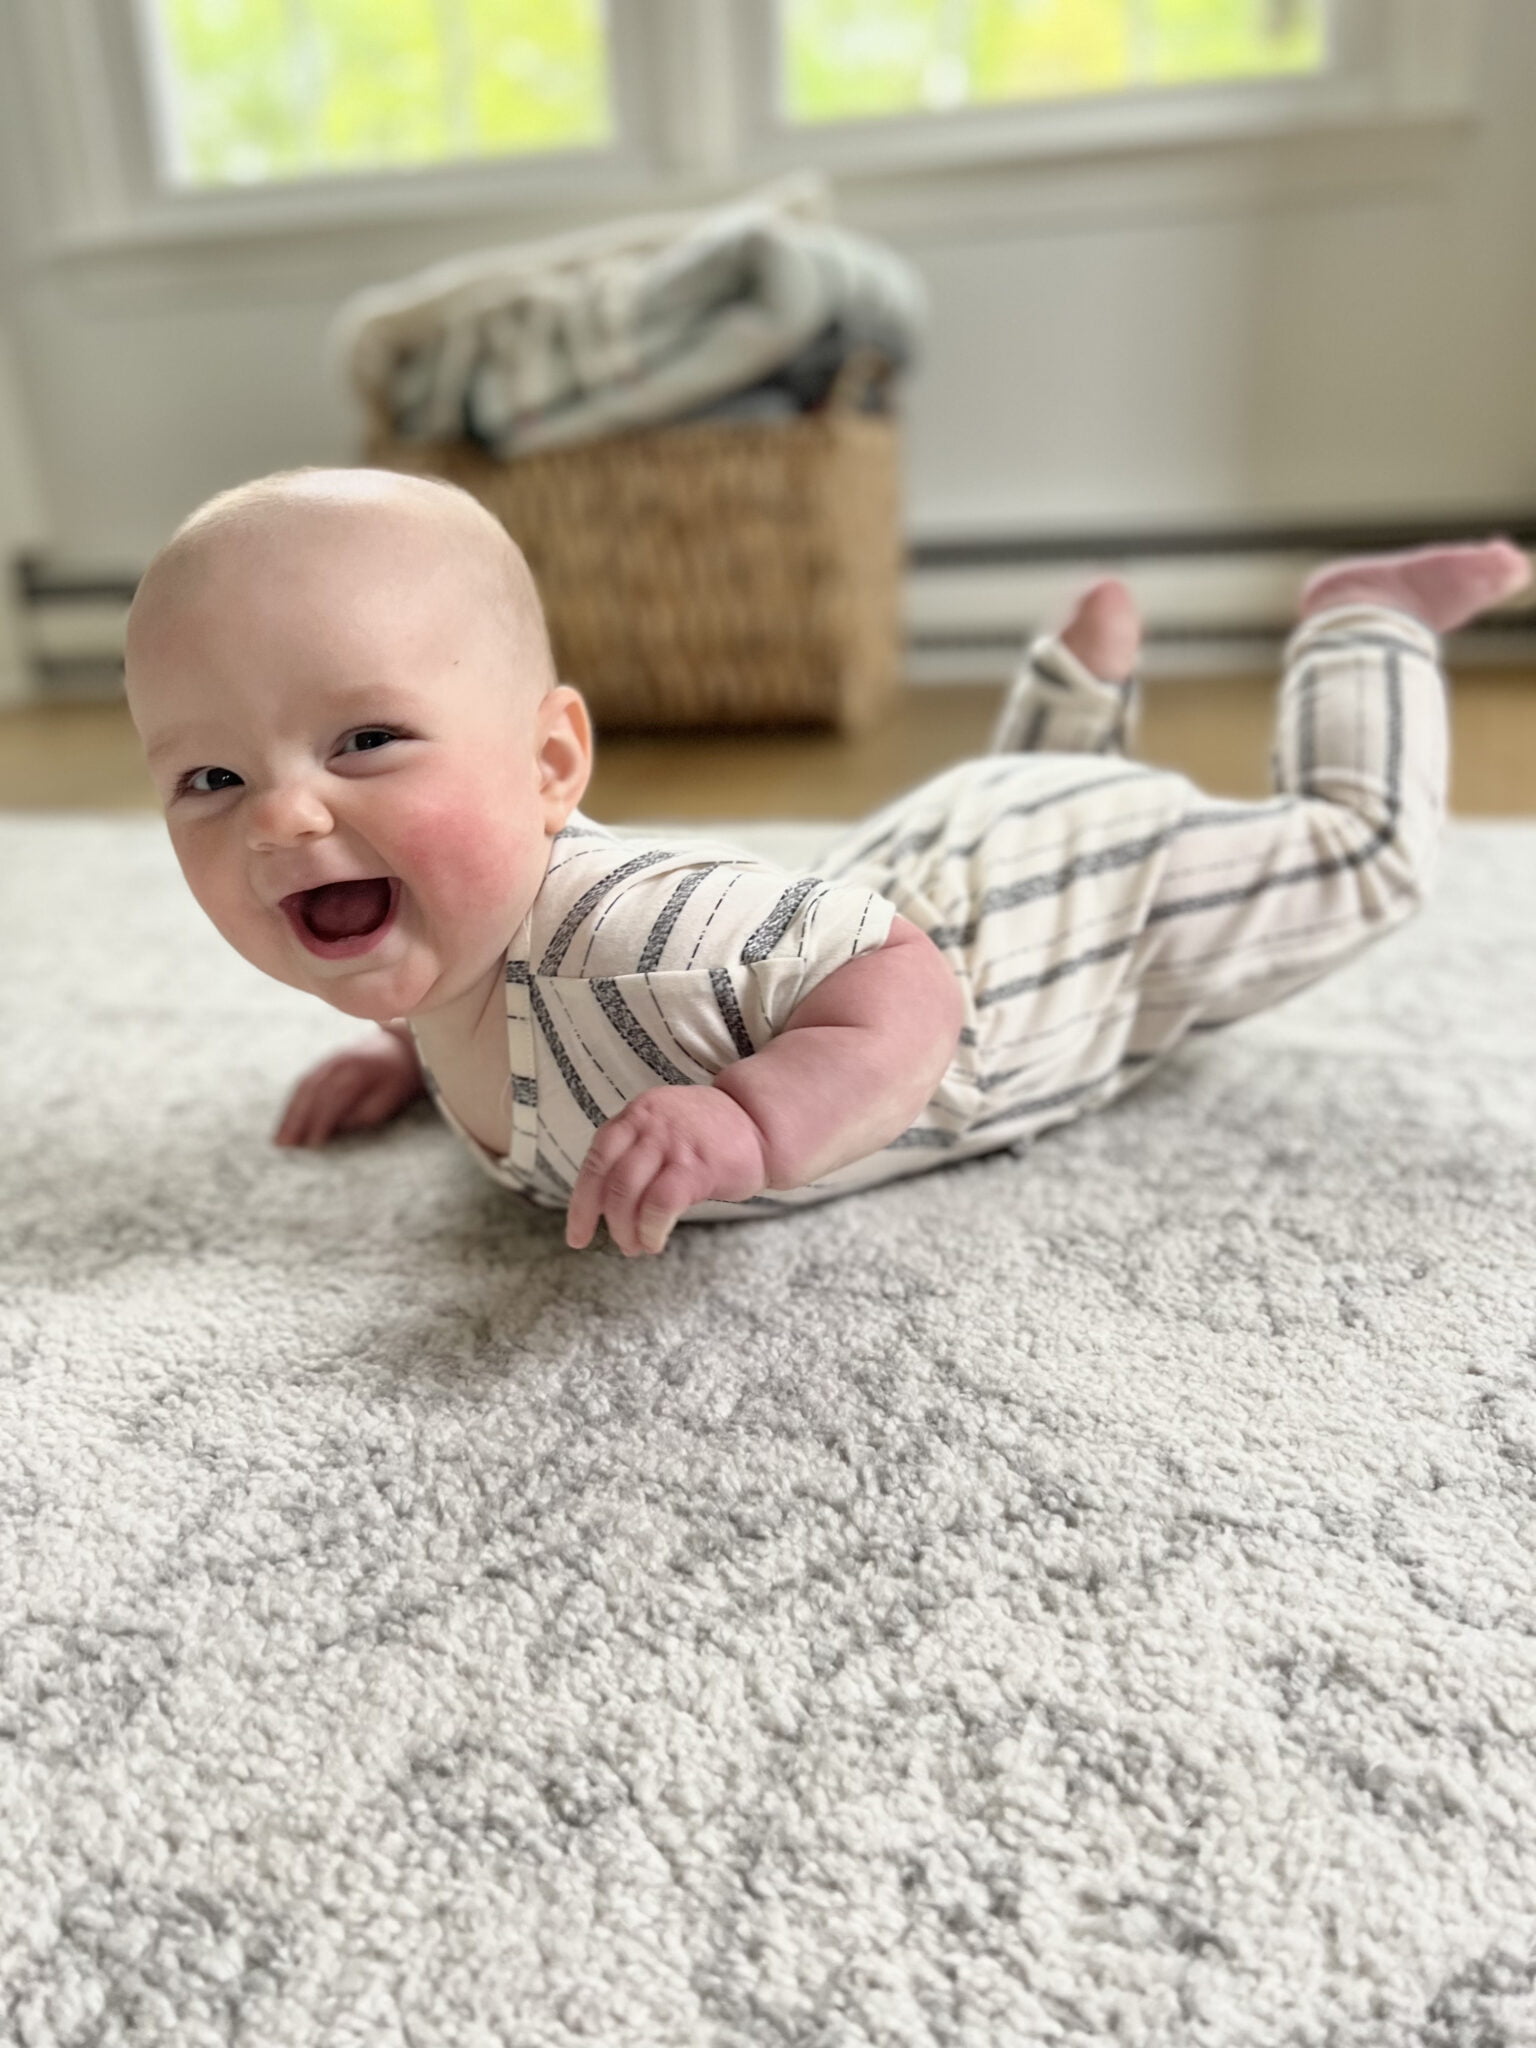 Baby Tummy Time 5 Months Old